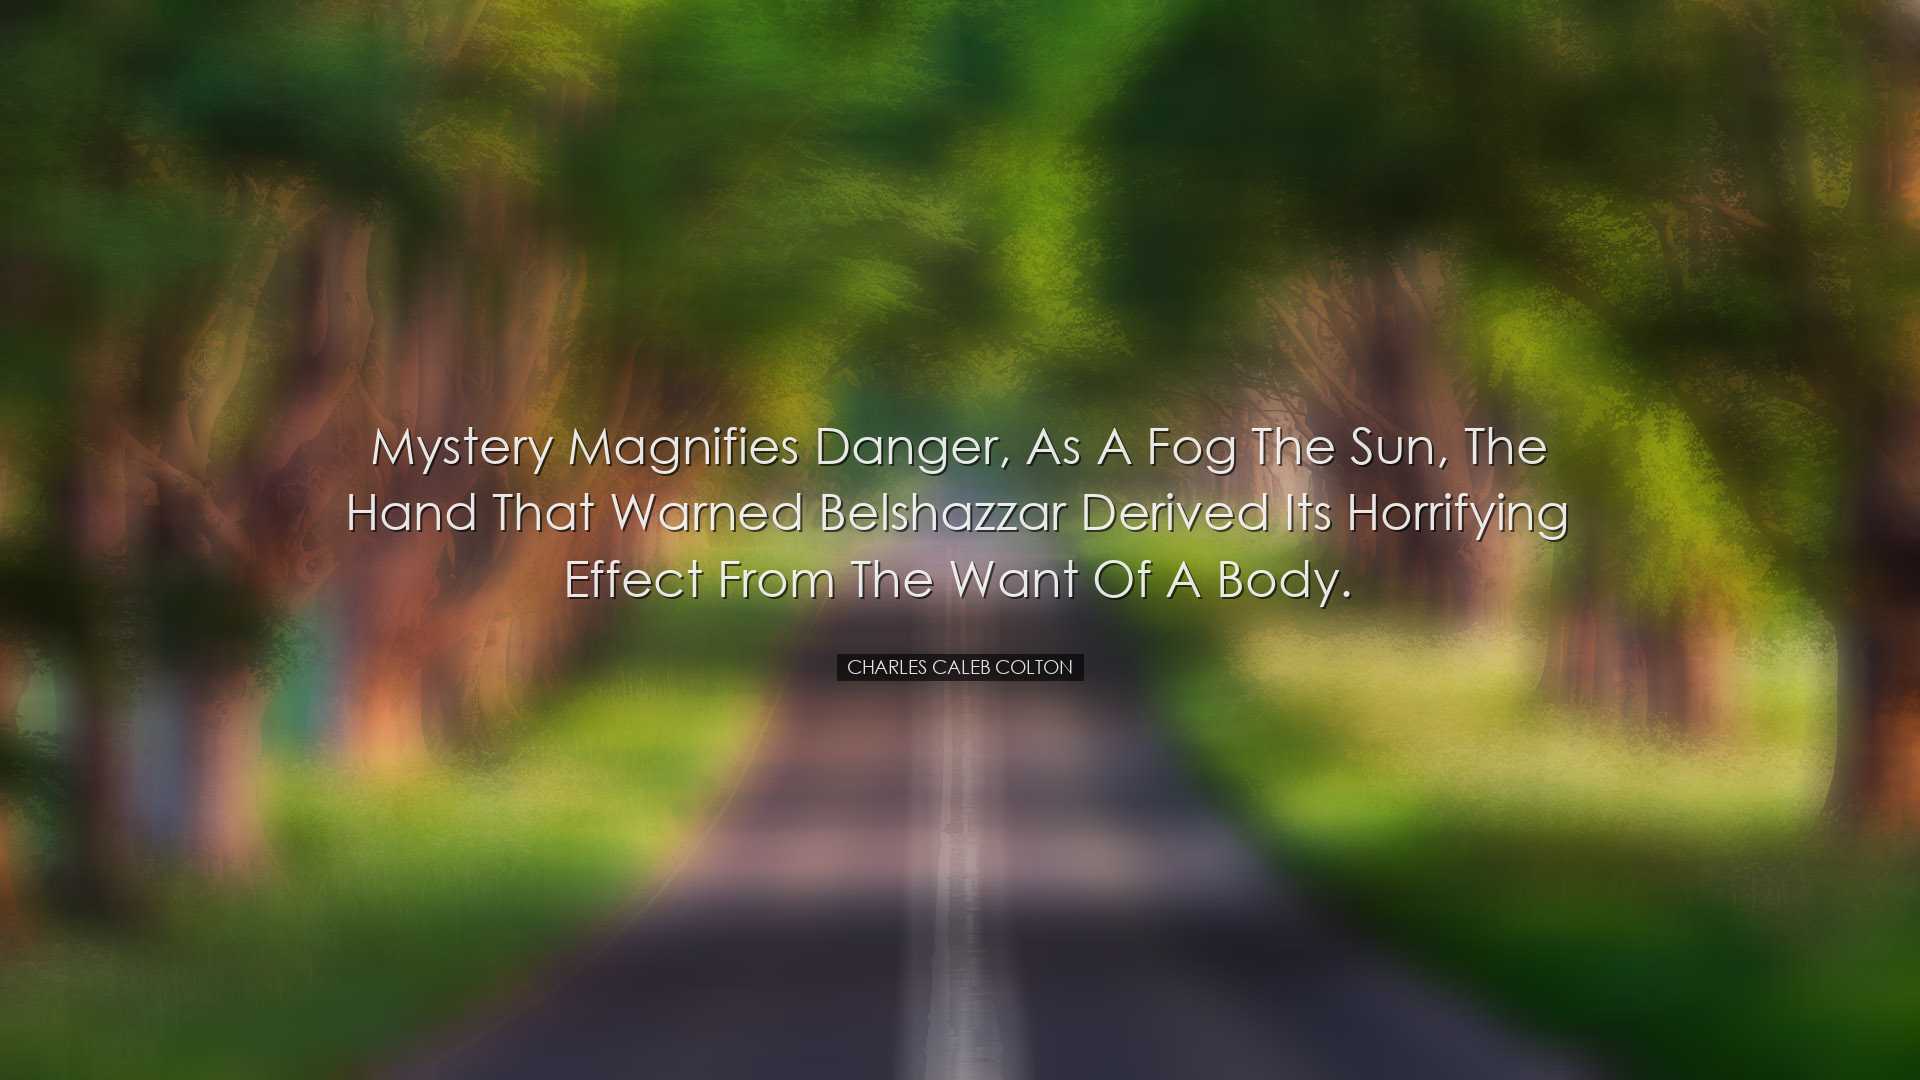 Mystery magnifies danger, as a fog the sun, the hand that warned B